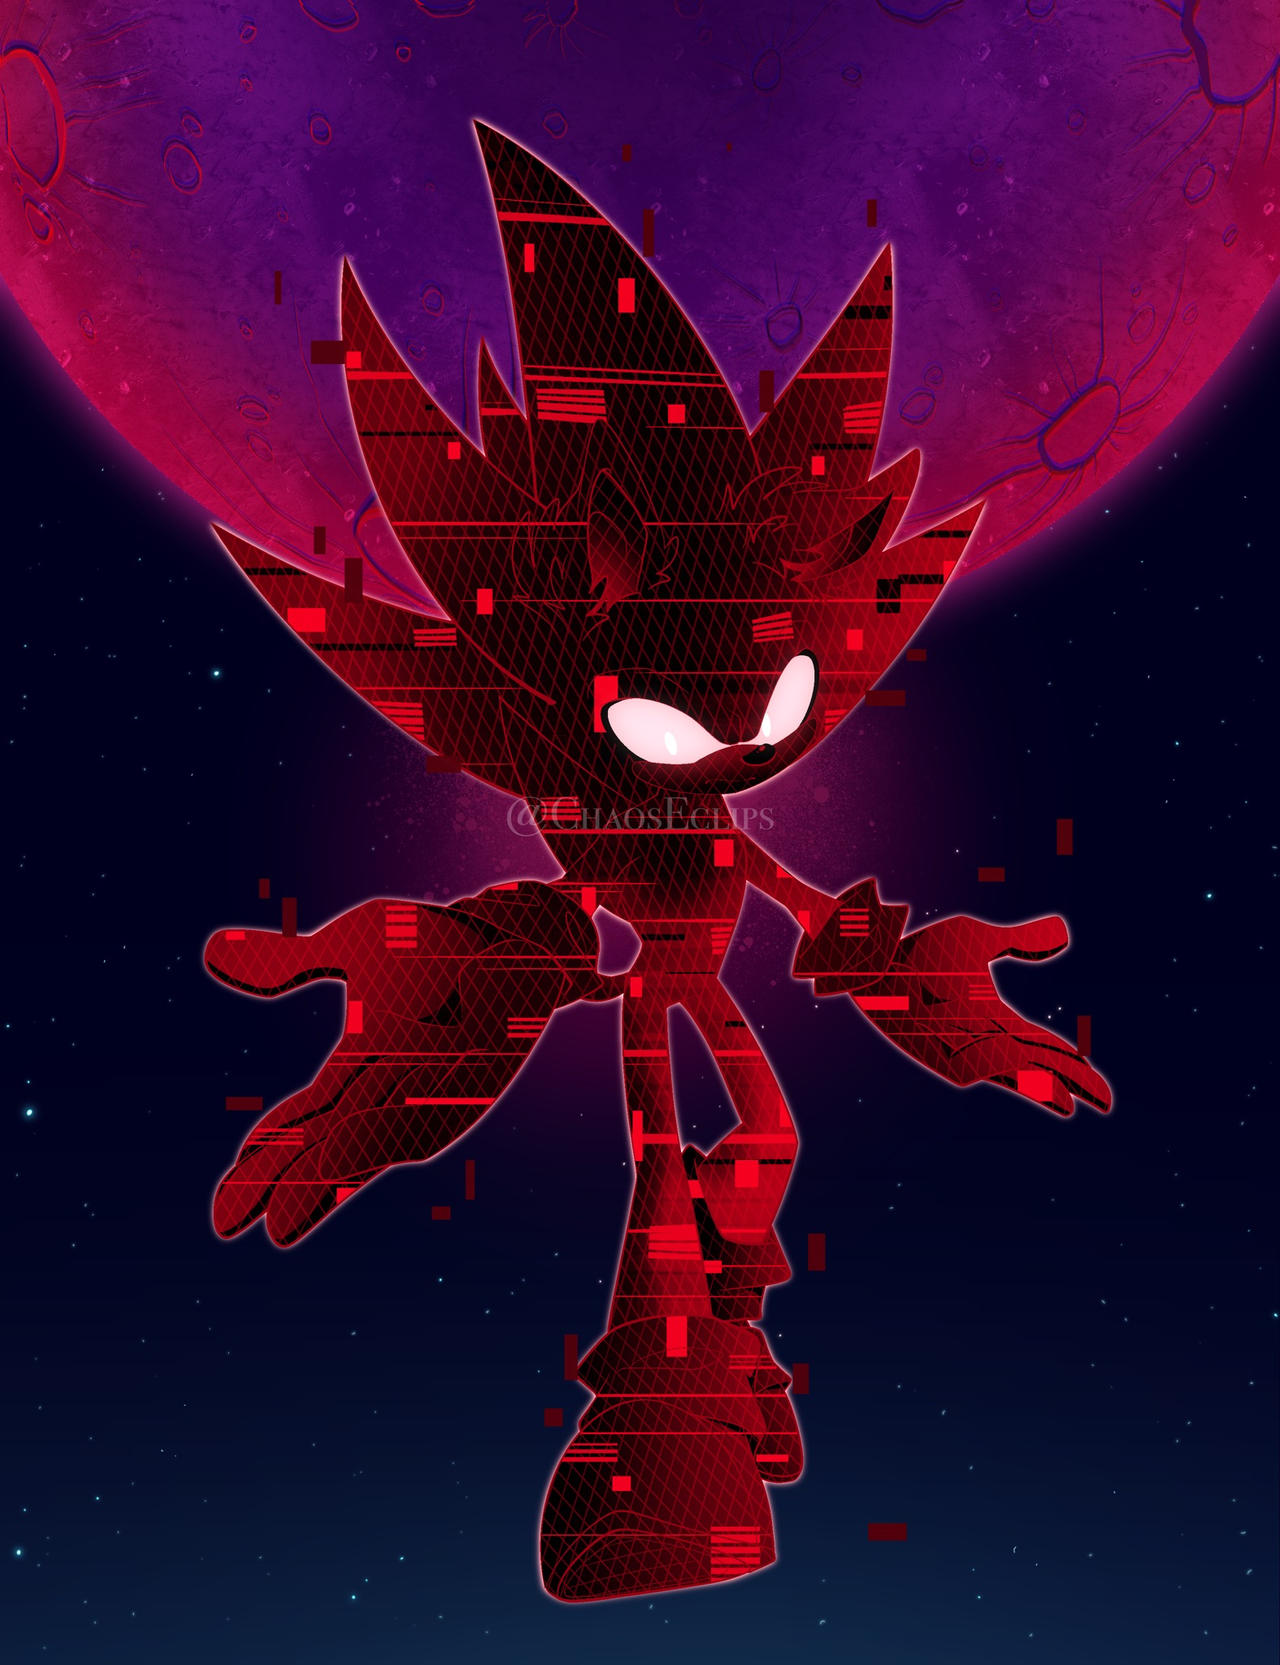 The End (Sonic Frontiers) (true form) by Hexsmasher on DeviantArt